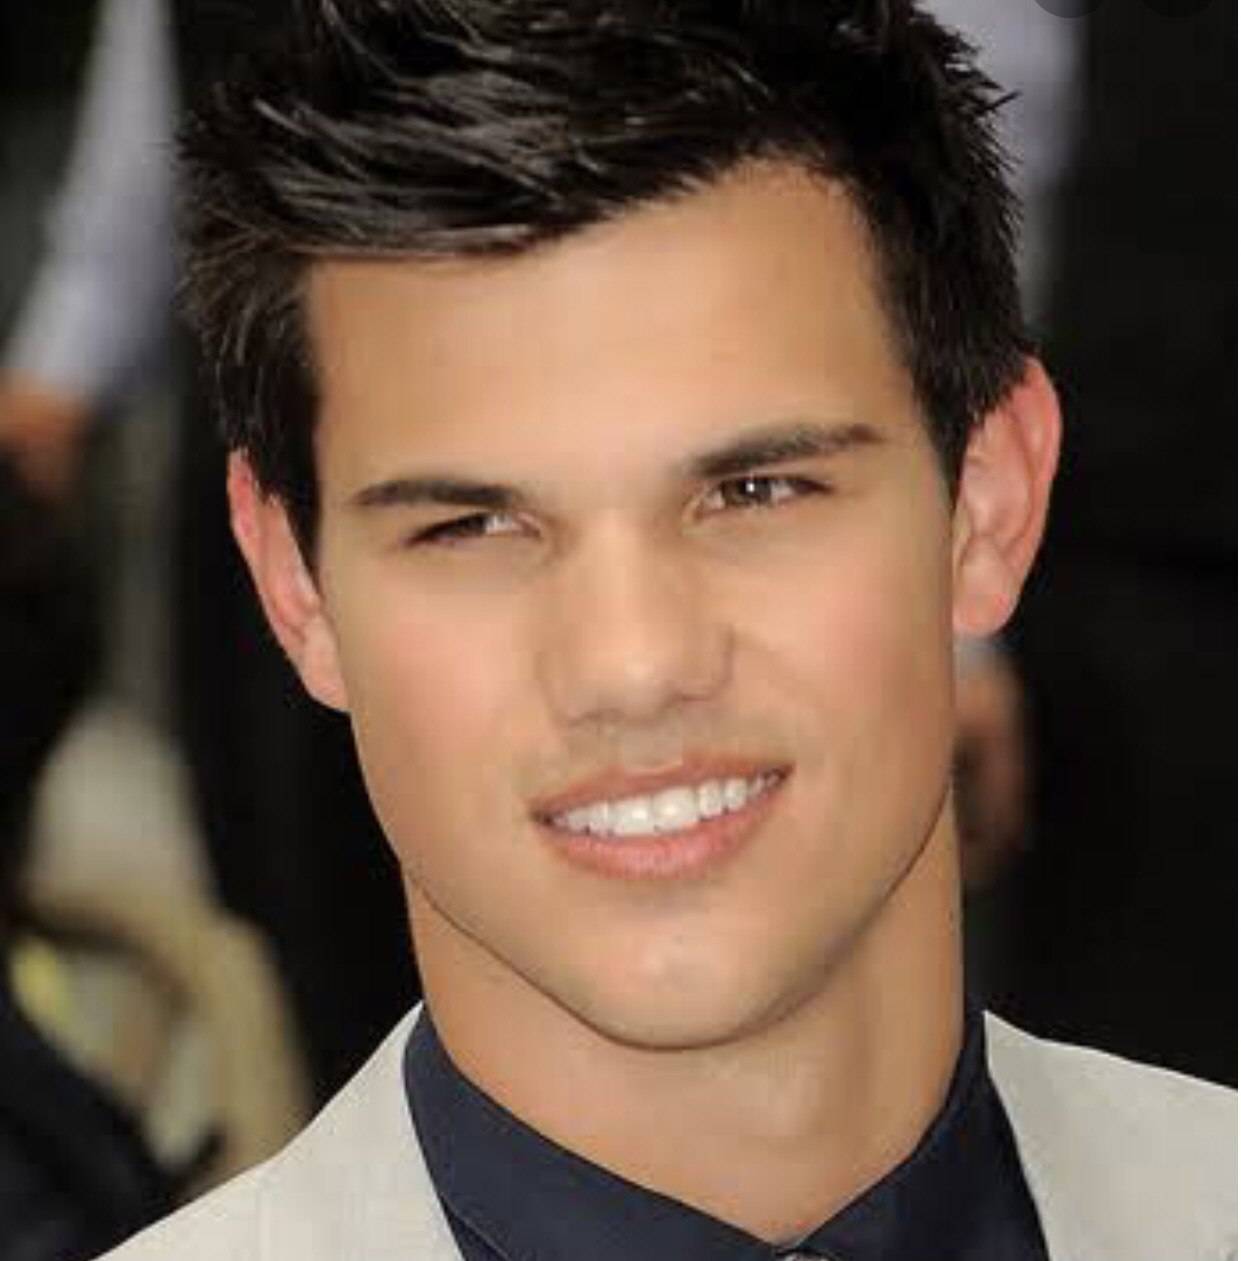 Taylor Lautner Says He Was 'Scared' and 'Super Anxious'